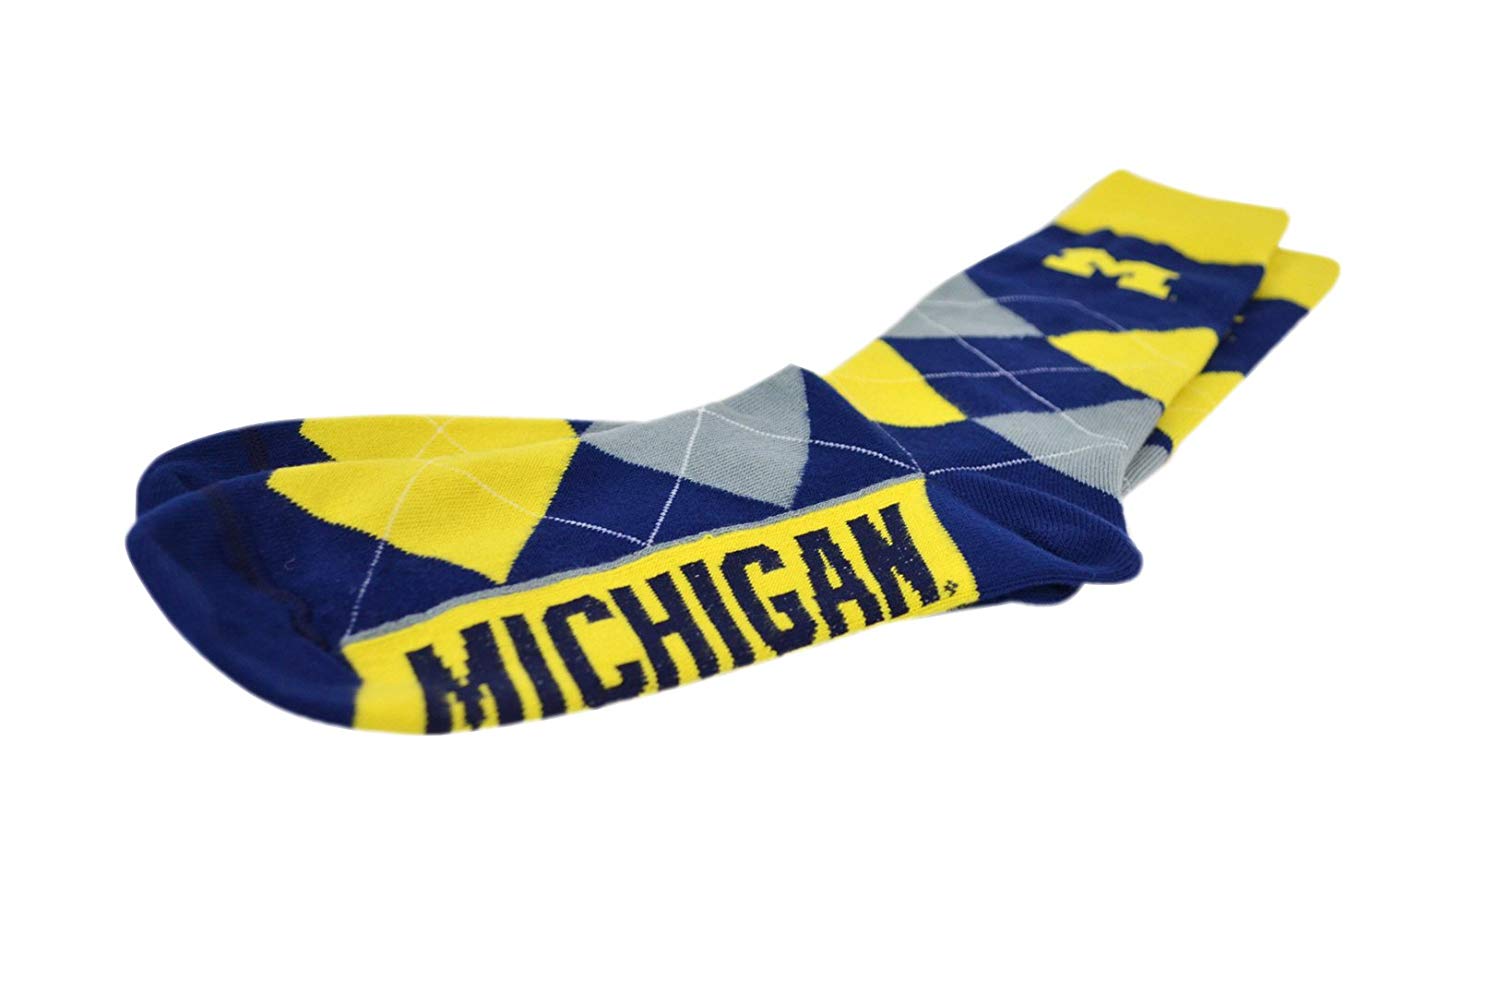 NCAA Collegiate Fan Shop Authentic NCAA 2-pack Large (10/13) Argyle Socks. Show School Pride At Home, Tailgating or a Game. Great addition to your on school gear.